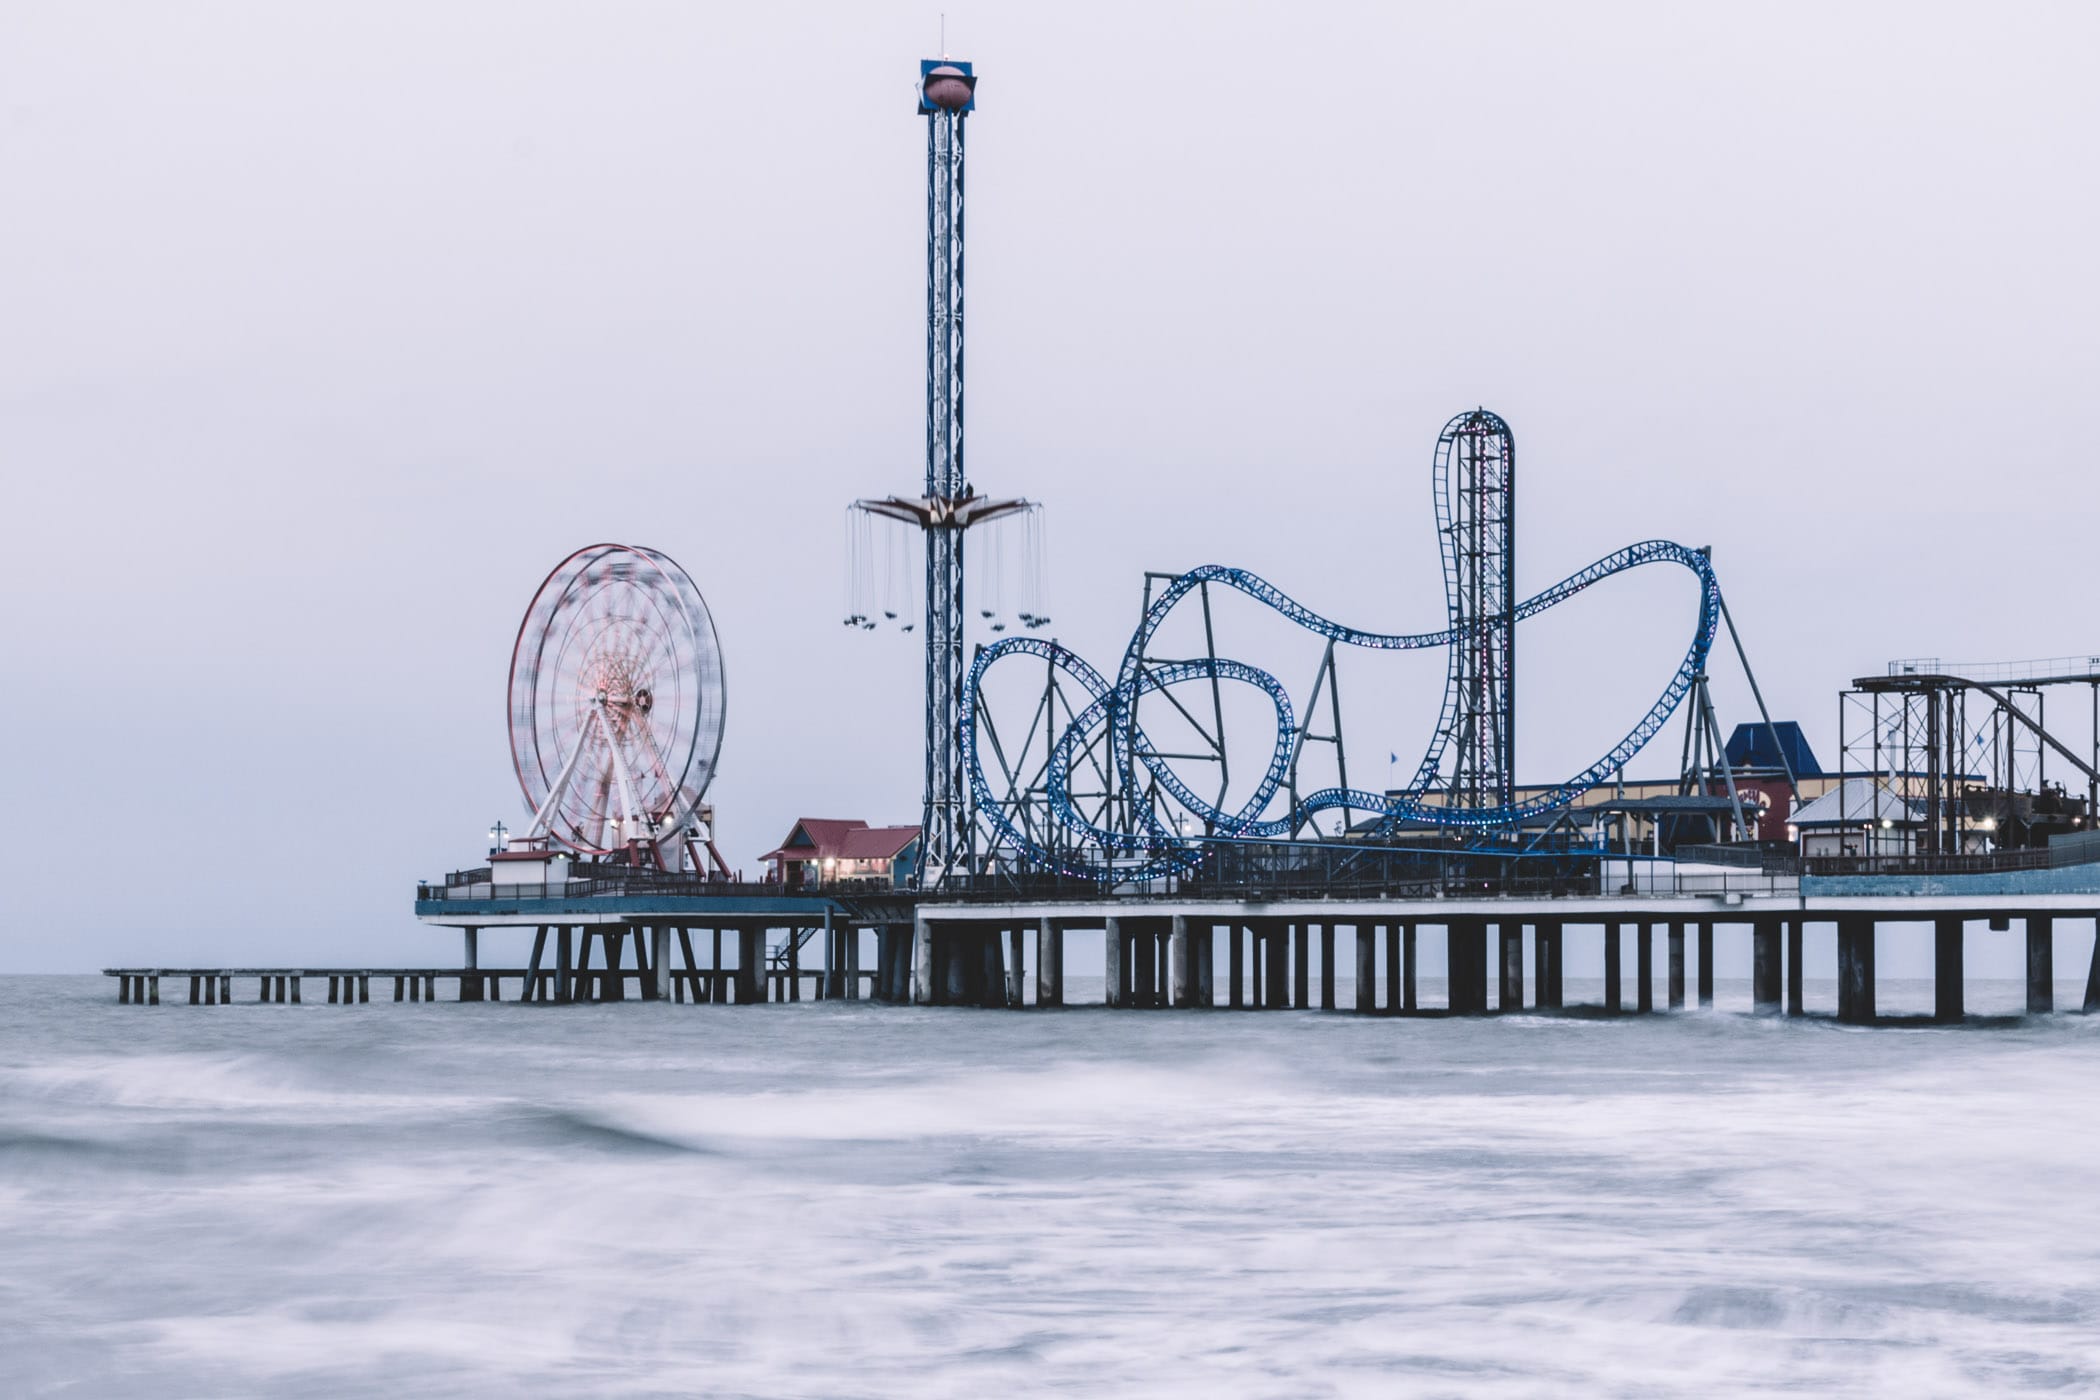 Galveston, Texas' Historic Pleasure Pier reaches out into the cold wind and overcast skies of the Gulf of Mexico.